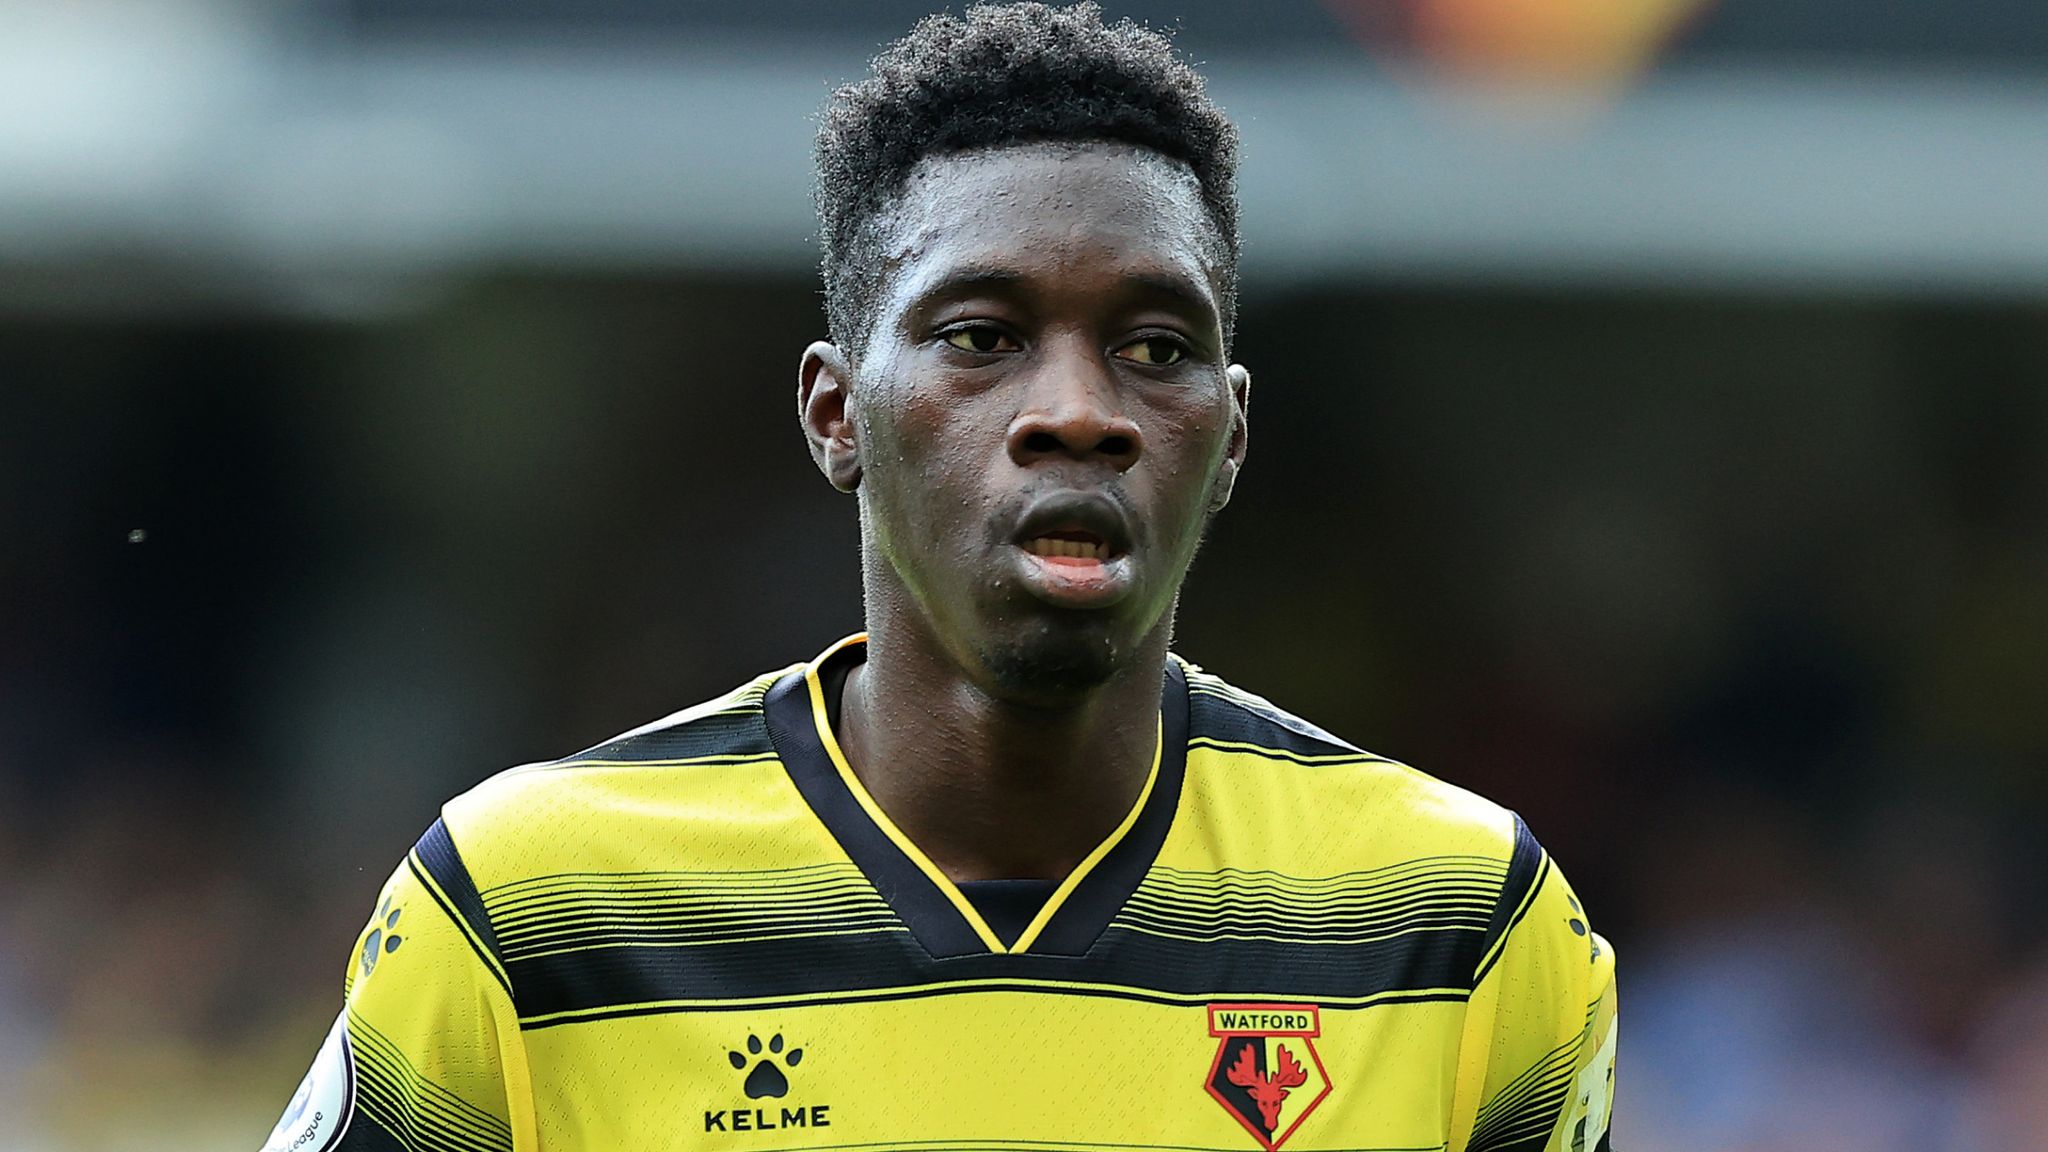 Africa Cup of Nations: Watford refusing to release Ismaila Sarr, say  Senegal | Football News | Sky Sports